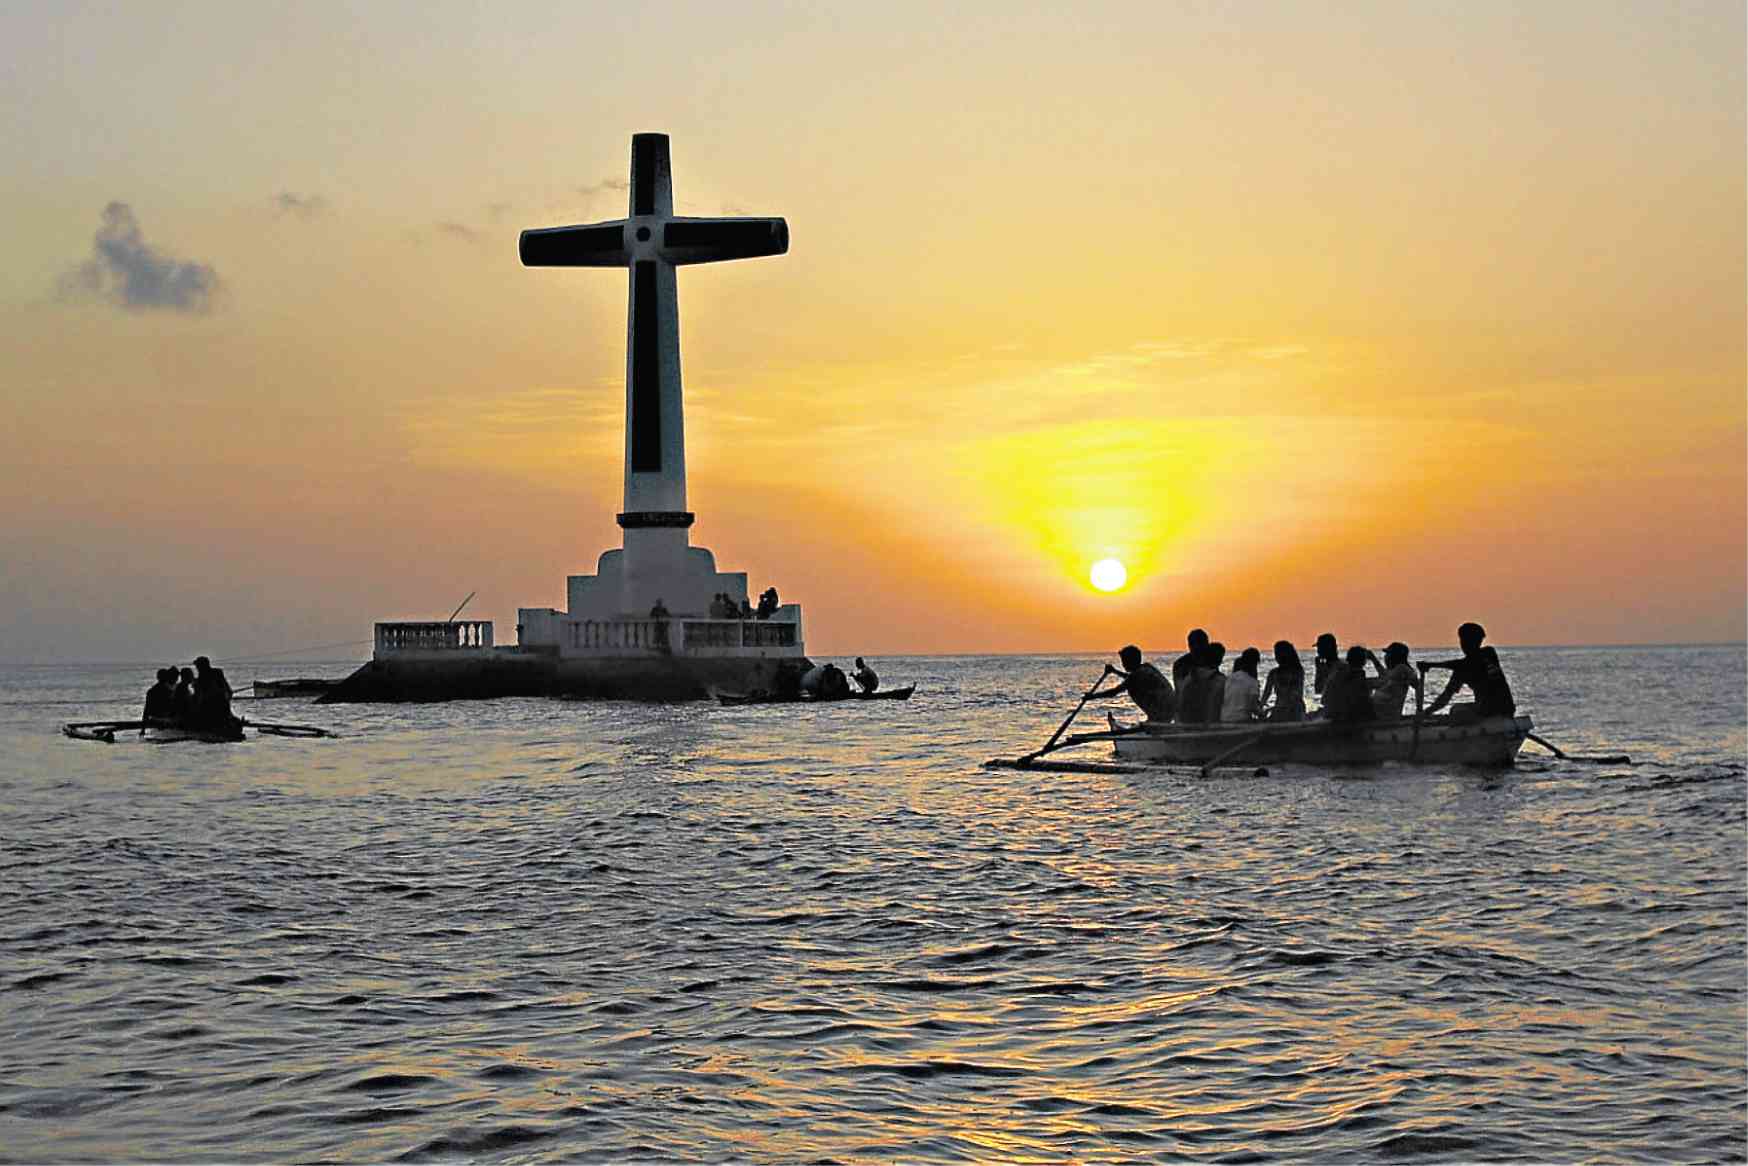 Camiguin’s Panaad: A journey of faith and discovery